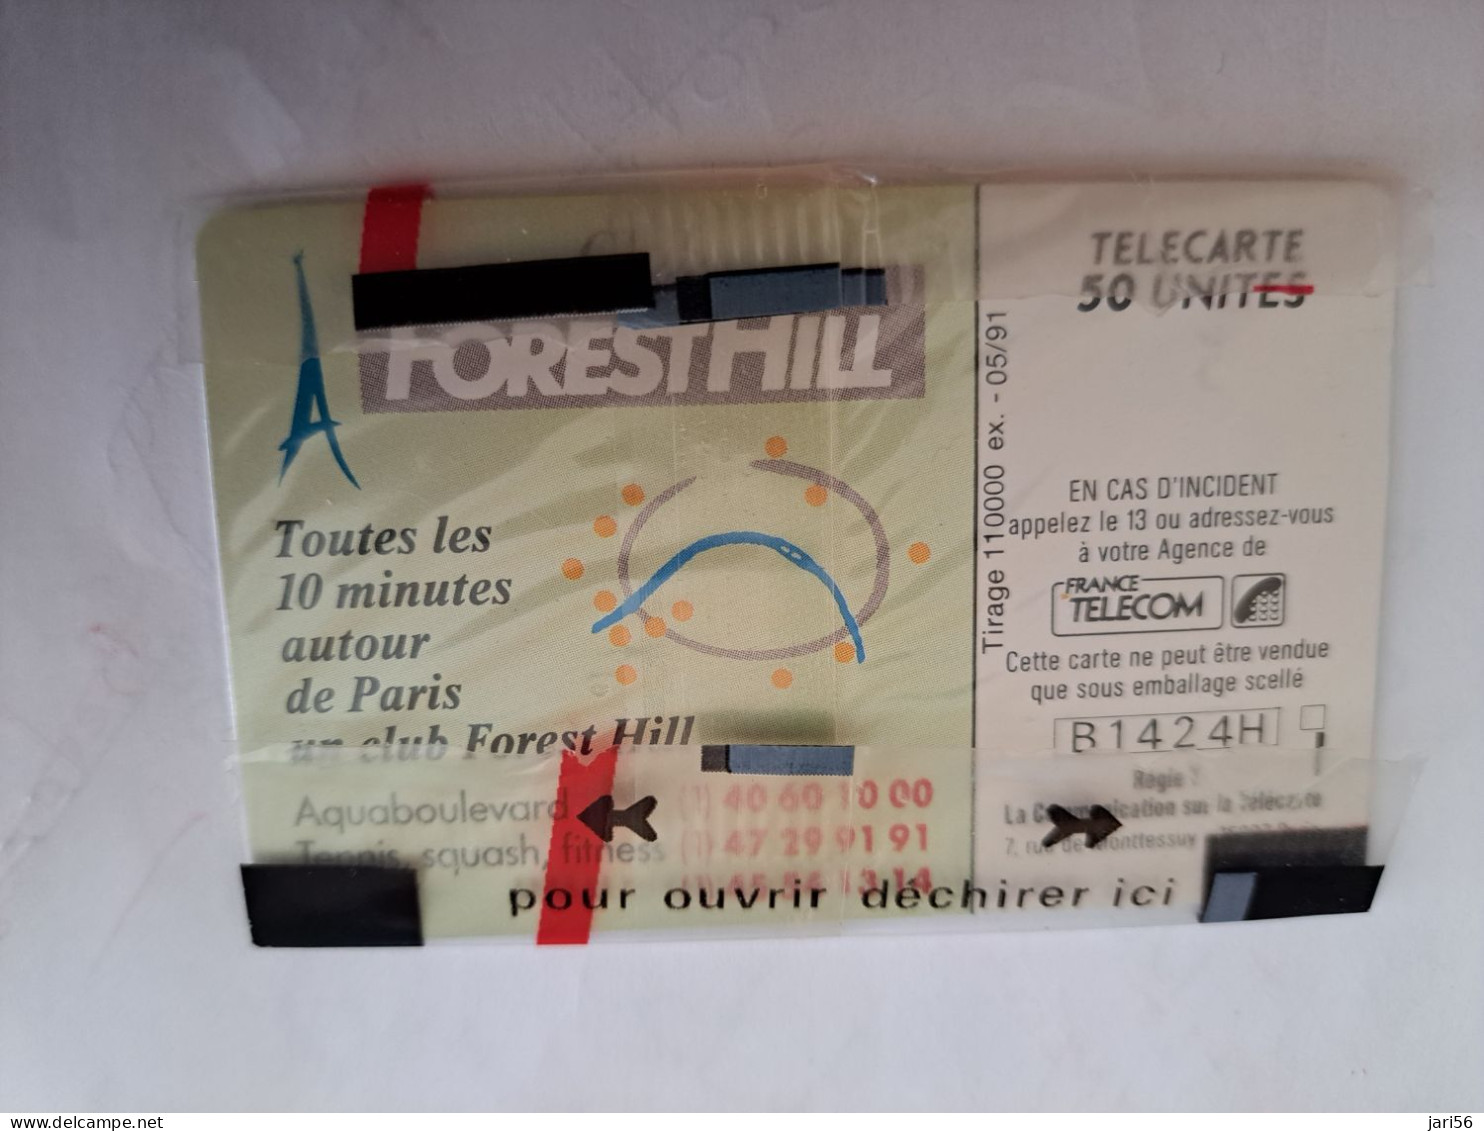 FRANCE/FRANKRIJK   CHIPCARD   50 UNITS / FOREST HILL    MINT IN WRAPPER     WITH CHIP     ** 14111** - Prepaid: Mobicartes